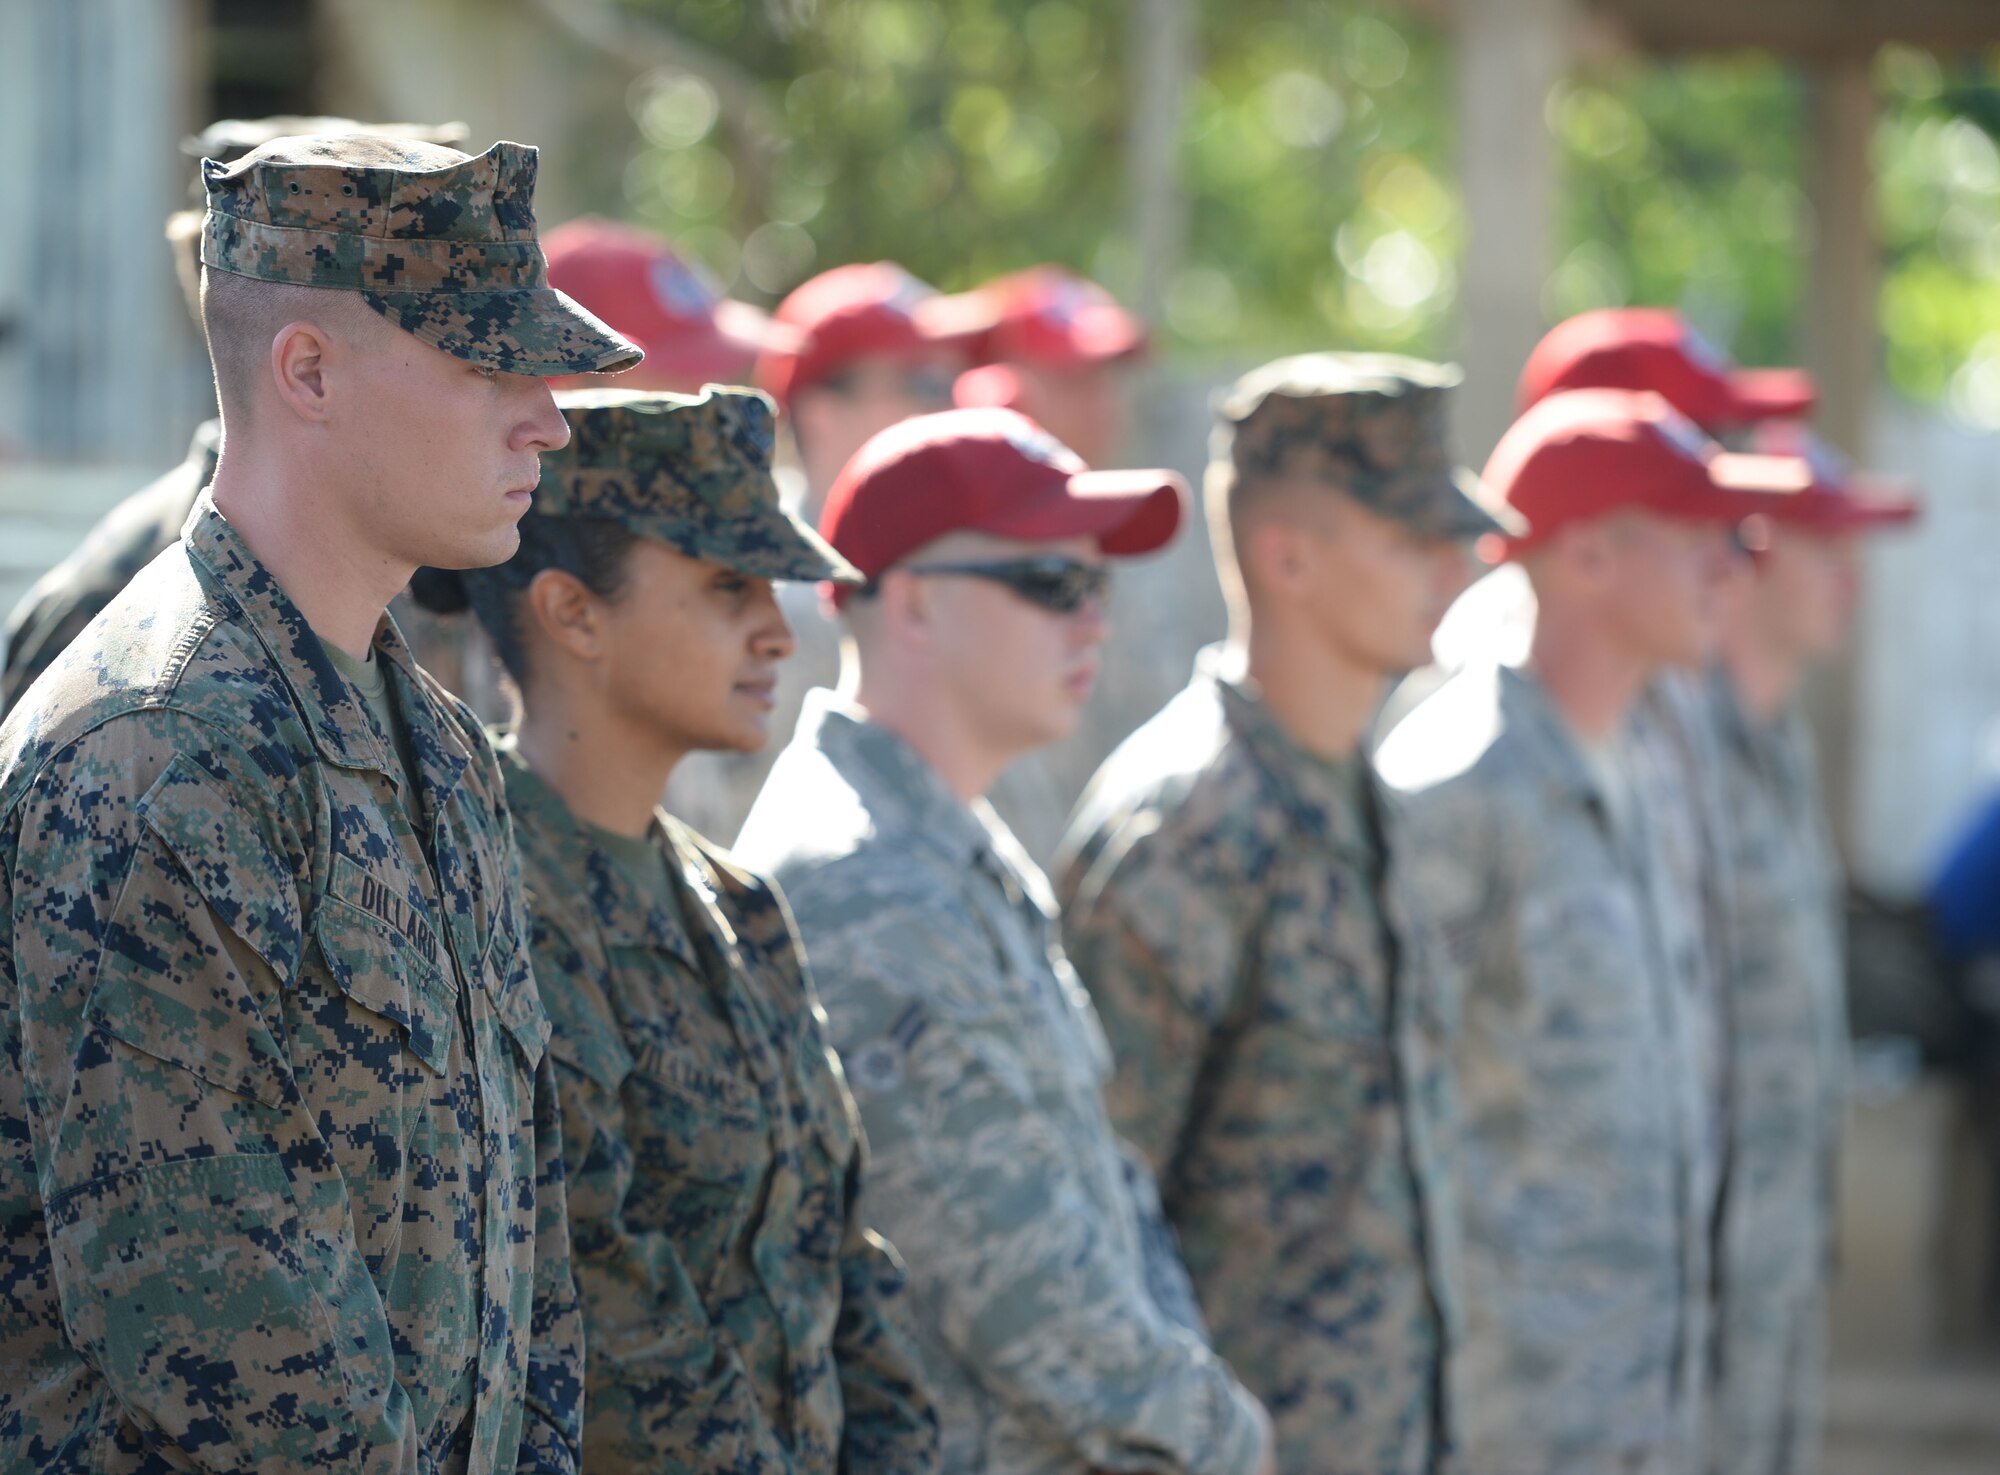 U.S. Air Force Airmen from the 823rd Expeditionary RED HORSE Squadron, out of Hurlburt Field, Fla., and U.S. Marines from the 271st Marine Wing Support Squadron, 2nd Marine Air Wing, out of Marine Corps Air Station Cherry Point, N.C., watch the groundbreaking ceremony at the Gabriela Mistral school in Ocotoes Alto, Honduras, June 1, 2015. The Airmen and Marines will be working together as part of the New Horizons Honduras 2015 training exercise, an annual humanitarian exercise put on by U.S. Southern Command. New Horizons was launched in the 1980s and is an annual joint humanitarian assistance exercise that U.S. Southern Command conducts with a partner nation in Central America, South America or the Caribbean. The exercise improves joint training readiness of U.S. and partner nation civil engineers, medical professionals and support personnel through humanitarian assistance activities. (U.S. Air Force photo by Capt. David J. Murphy/Released)